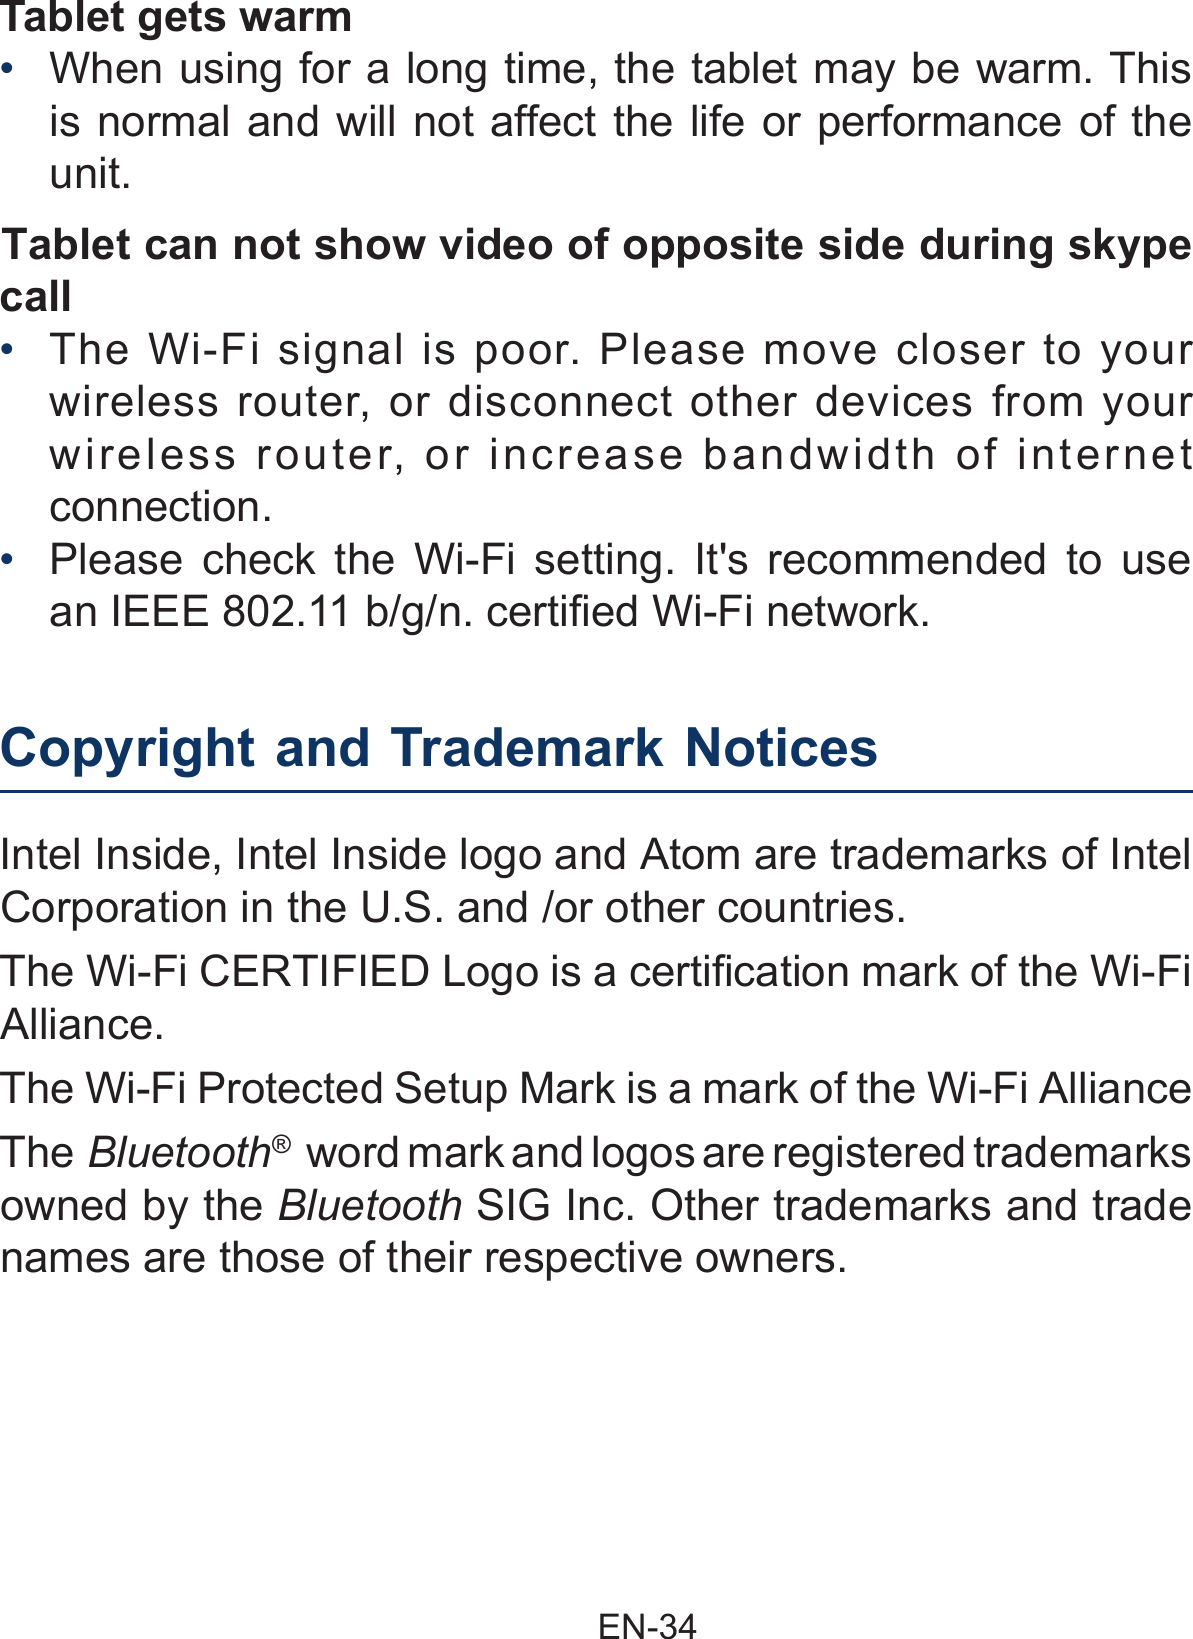                                                EN-34 Copyright and Trademark Notices     Intel Inside, Intel Inside logo and Atom are trademarks of Intel Corporation in the U.S. and /or other countries. The Wi-Fi CERTIFIED Logo is a certification mark of the Wi-Fi Alliance. The Wi-Fi Protected Setup Mark is a mark of the Wi-Fi AllianceThe Bluetooth®  word mark and logos are registered trademarks owned by the Bluetooth SIG Inc. Other trademarks and trade names are those of their respective owners.Tablet gets warm• When using for a long time, the tablet may be warm. This is normal and will not affect the life or performance of the unit.Tablet can not show video of opposite side during skype call  •  The Wi-Fi signal is poor. Please move closer to your wireless router, or disconnect other devices from your wireless router, or increase bandwidth of internet connection.•  Please check the Wi-Fi setting. It&apos;s recommended to use an IEEE 802.11 b/g/n. certified Wi-Fi network.  